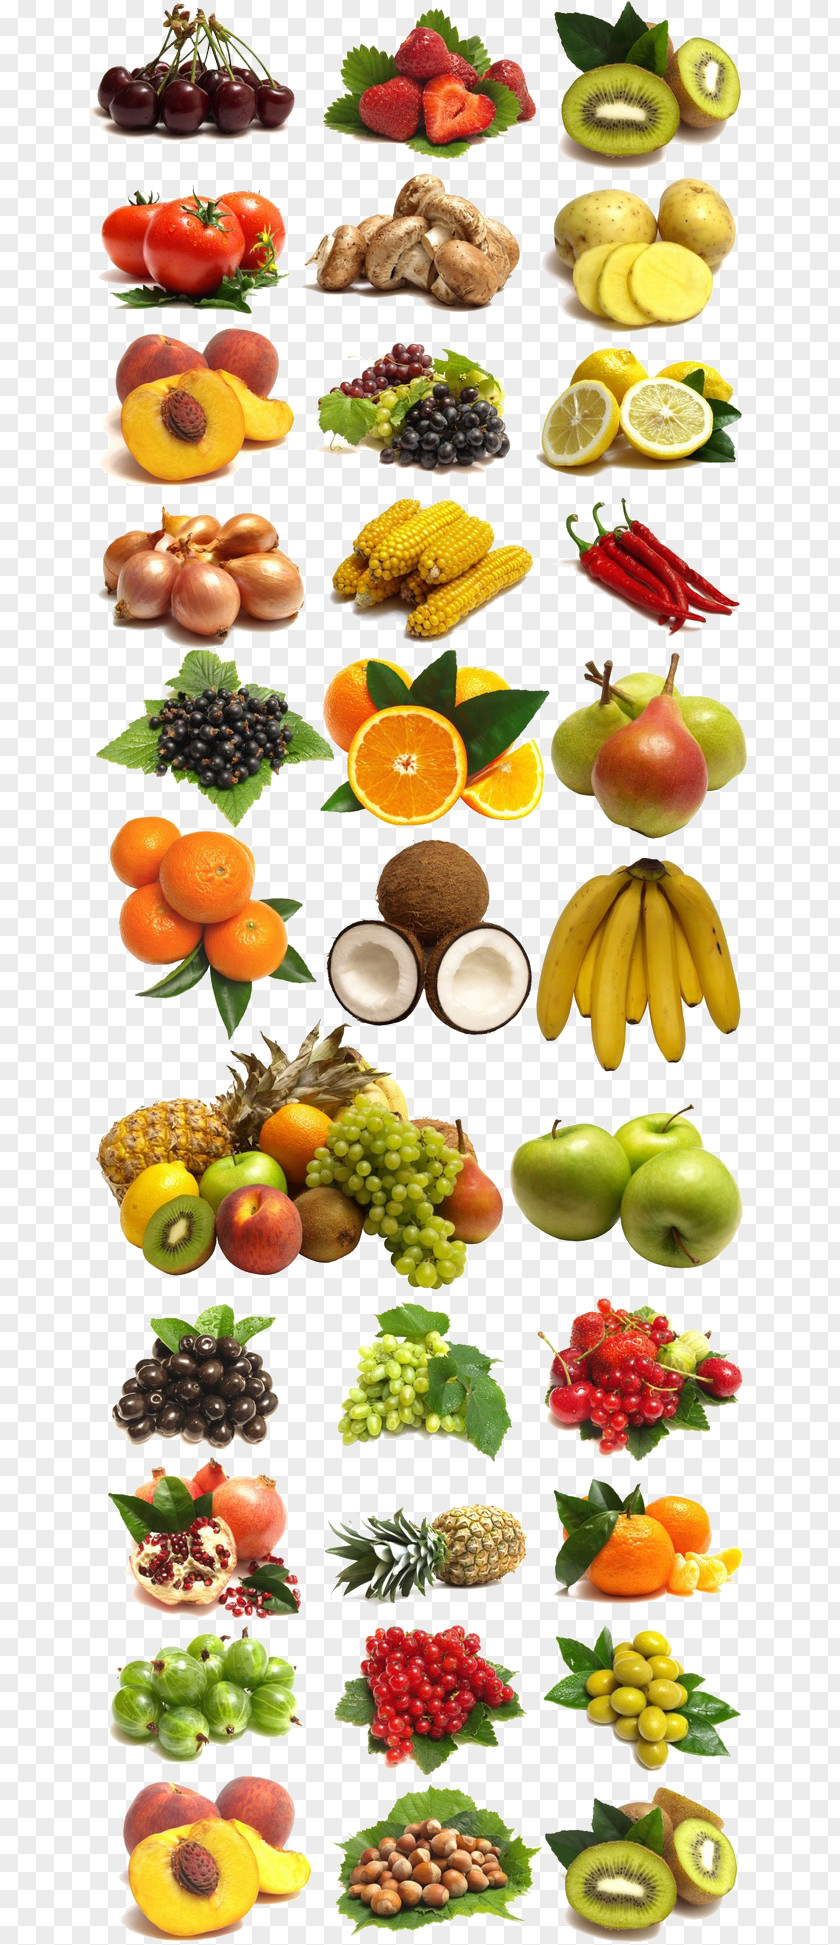 A Large Collection Of Fruits And Vegetables PNG